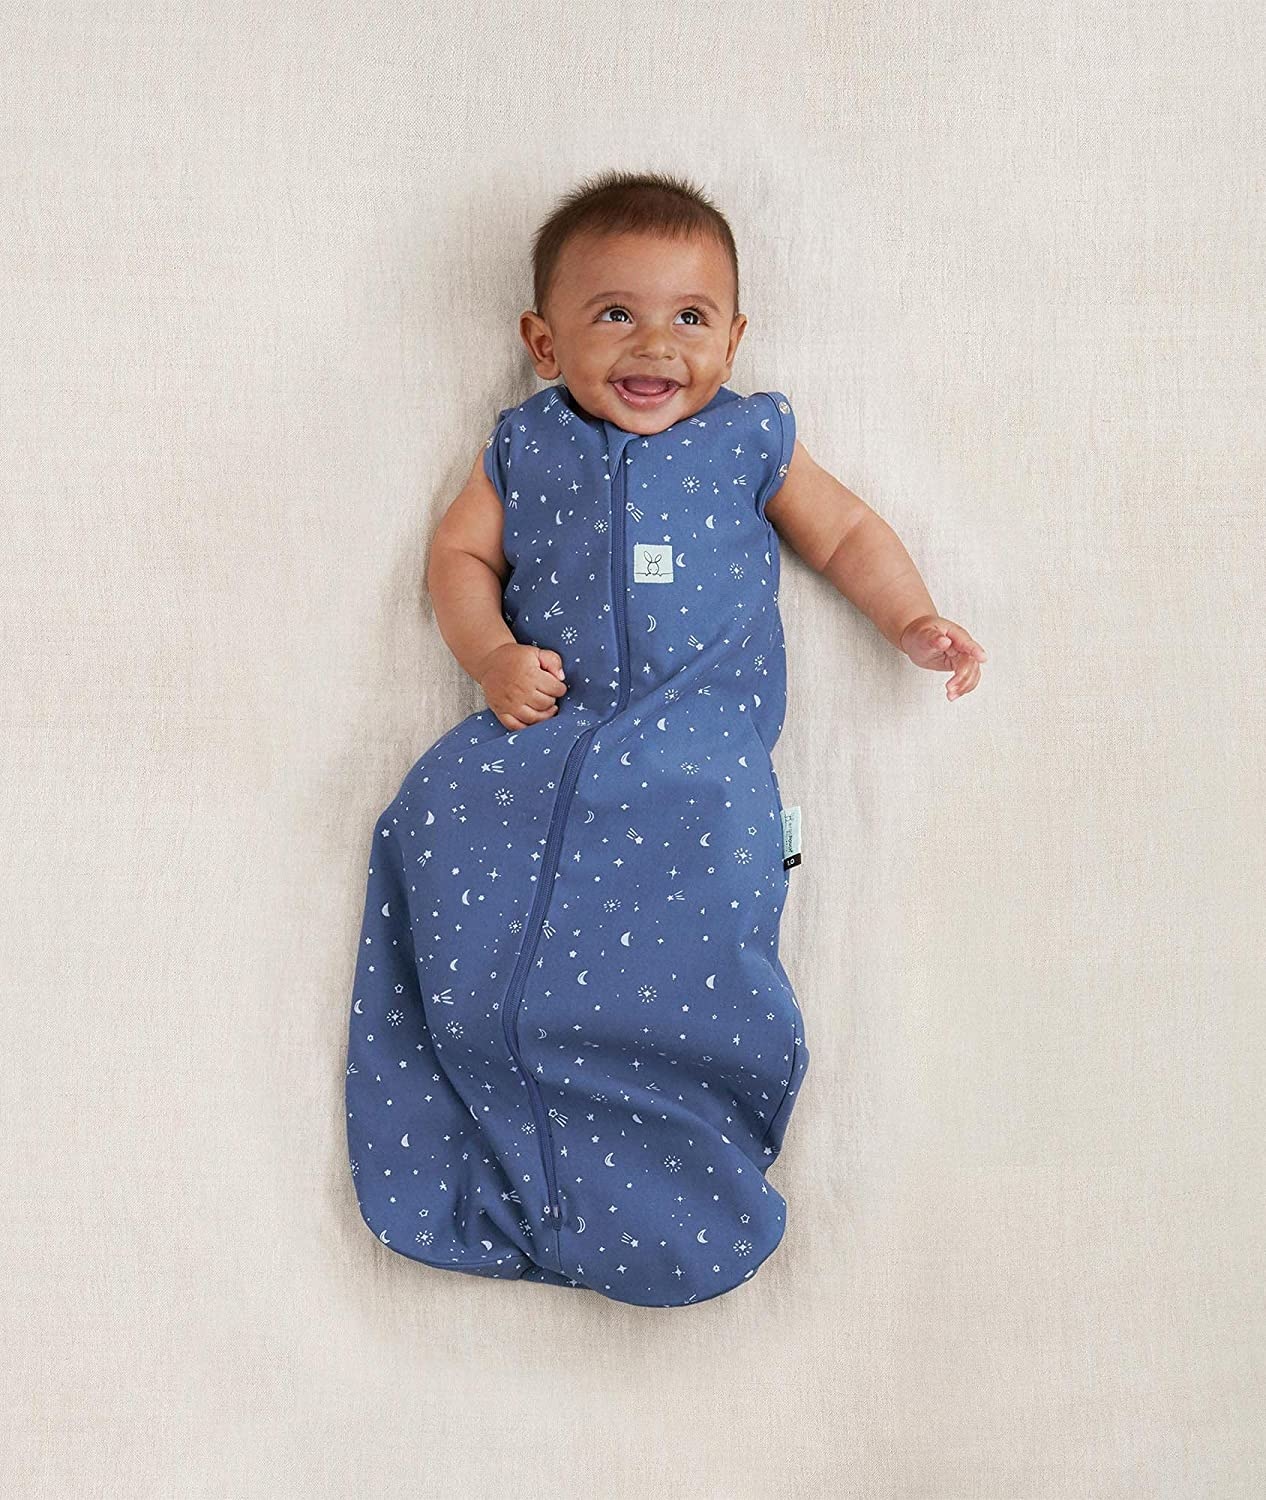 ergoPouch Cocoon Organic Cotton Bamboo Zip Up Swaddle Bag - Night Sky 1.0 TOG